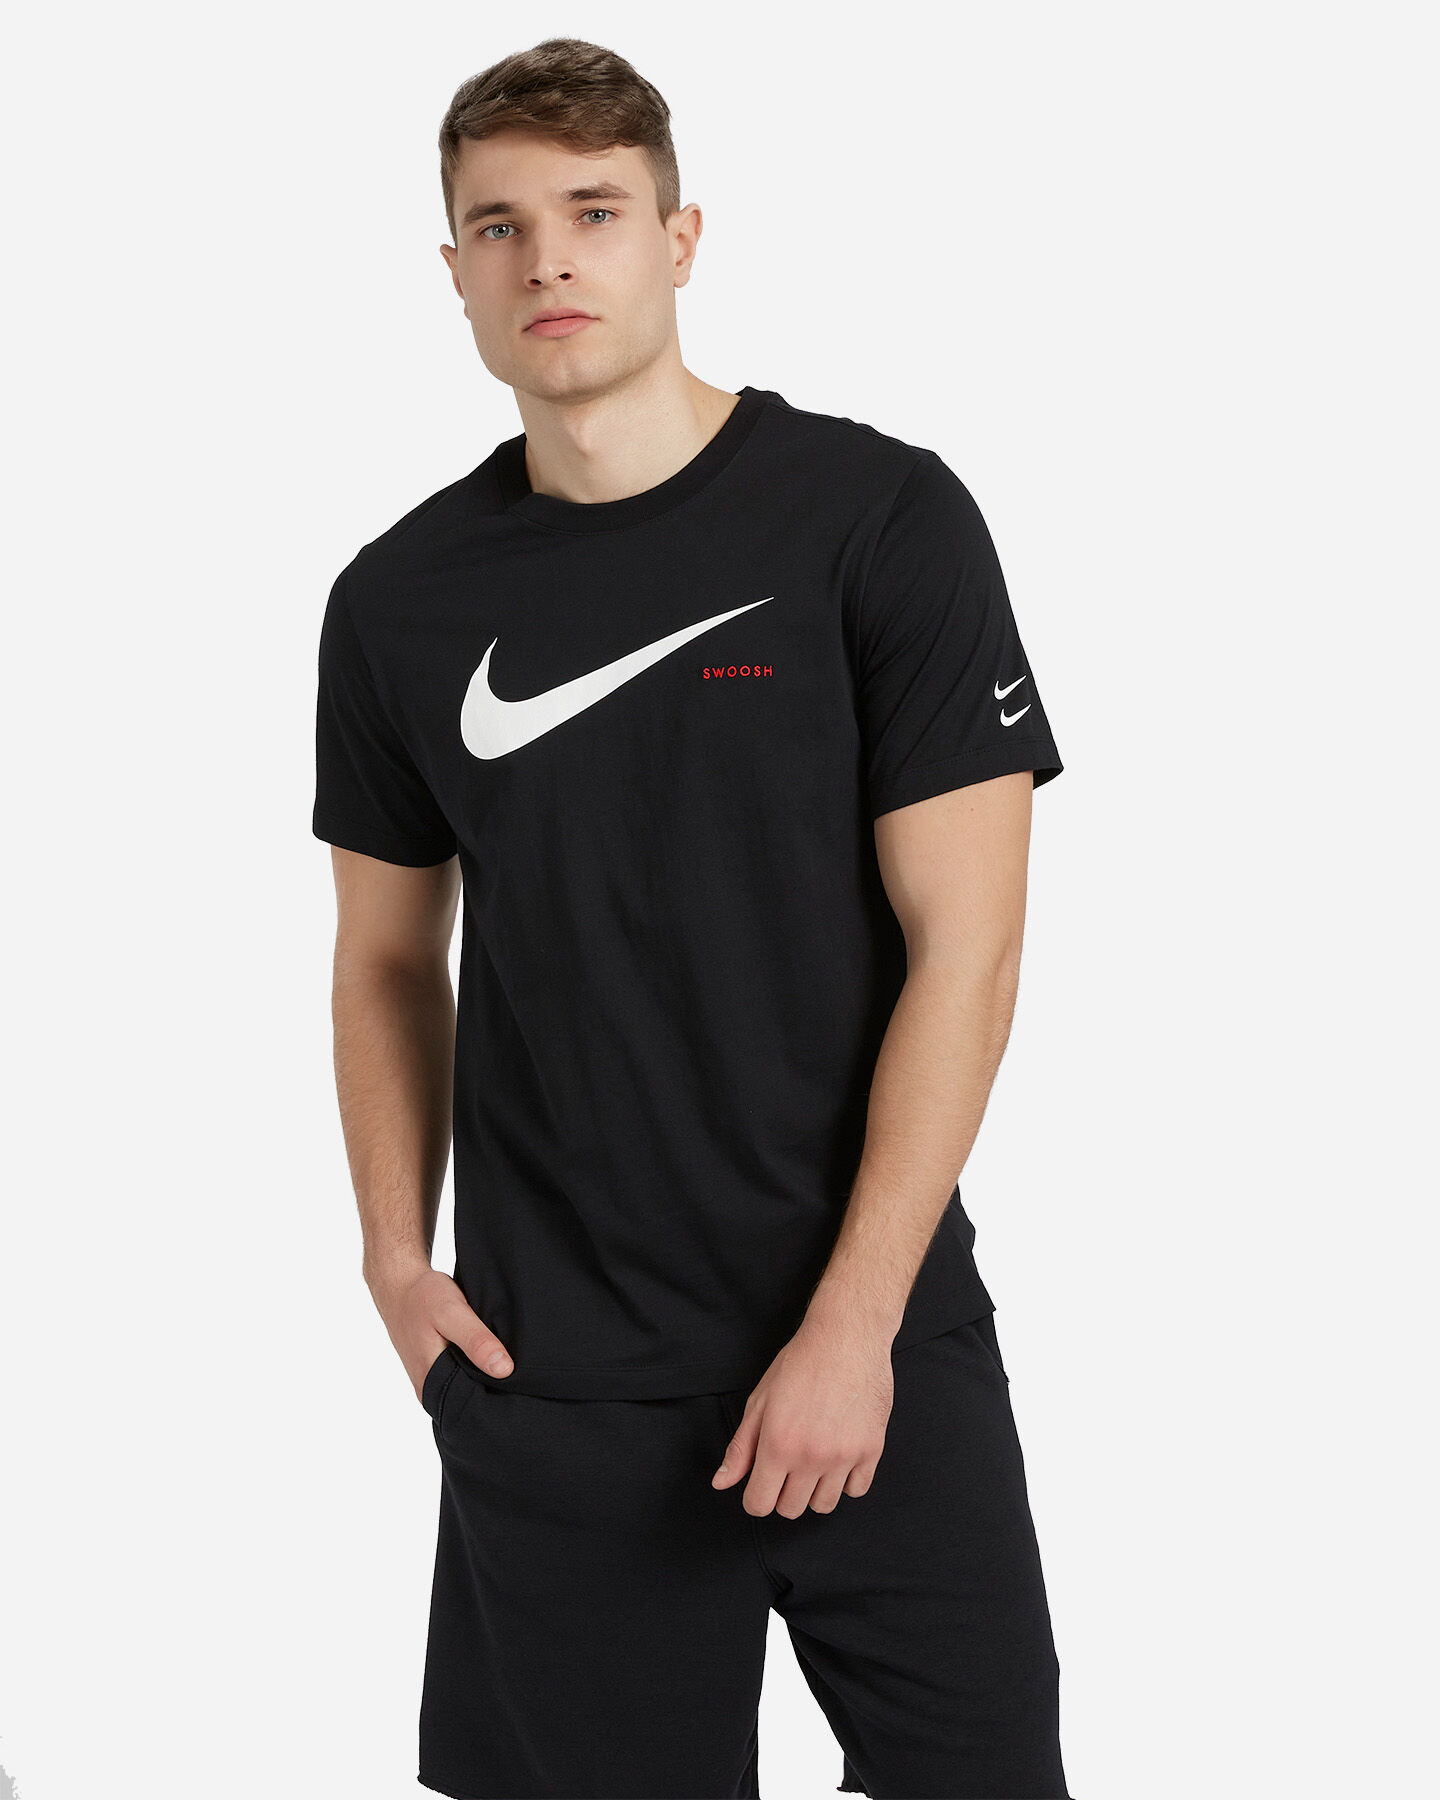  T-Shirt NIKE SWOOSH M S5164730|010|S scatto 0